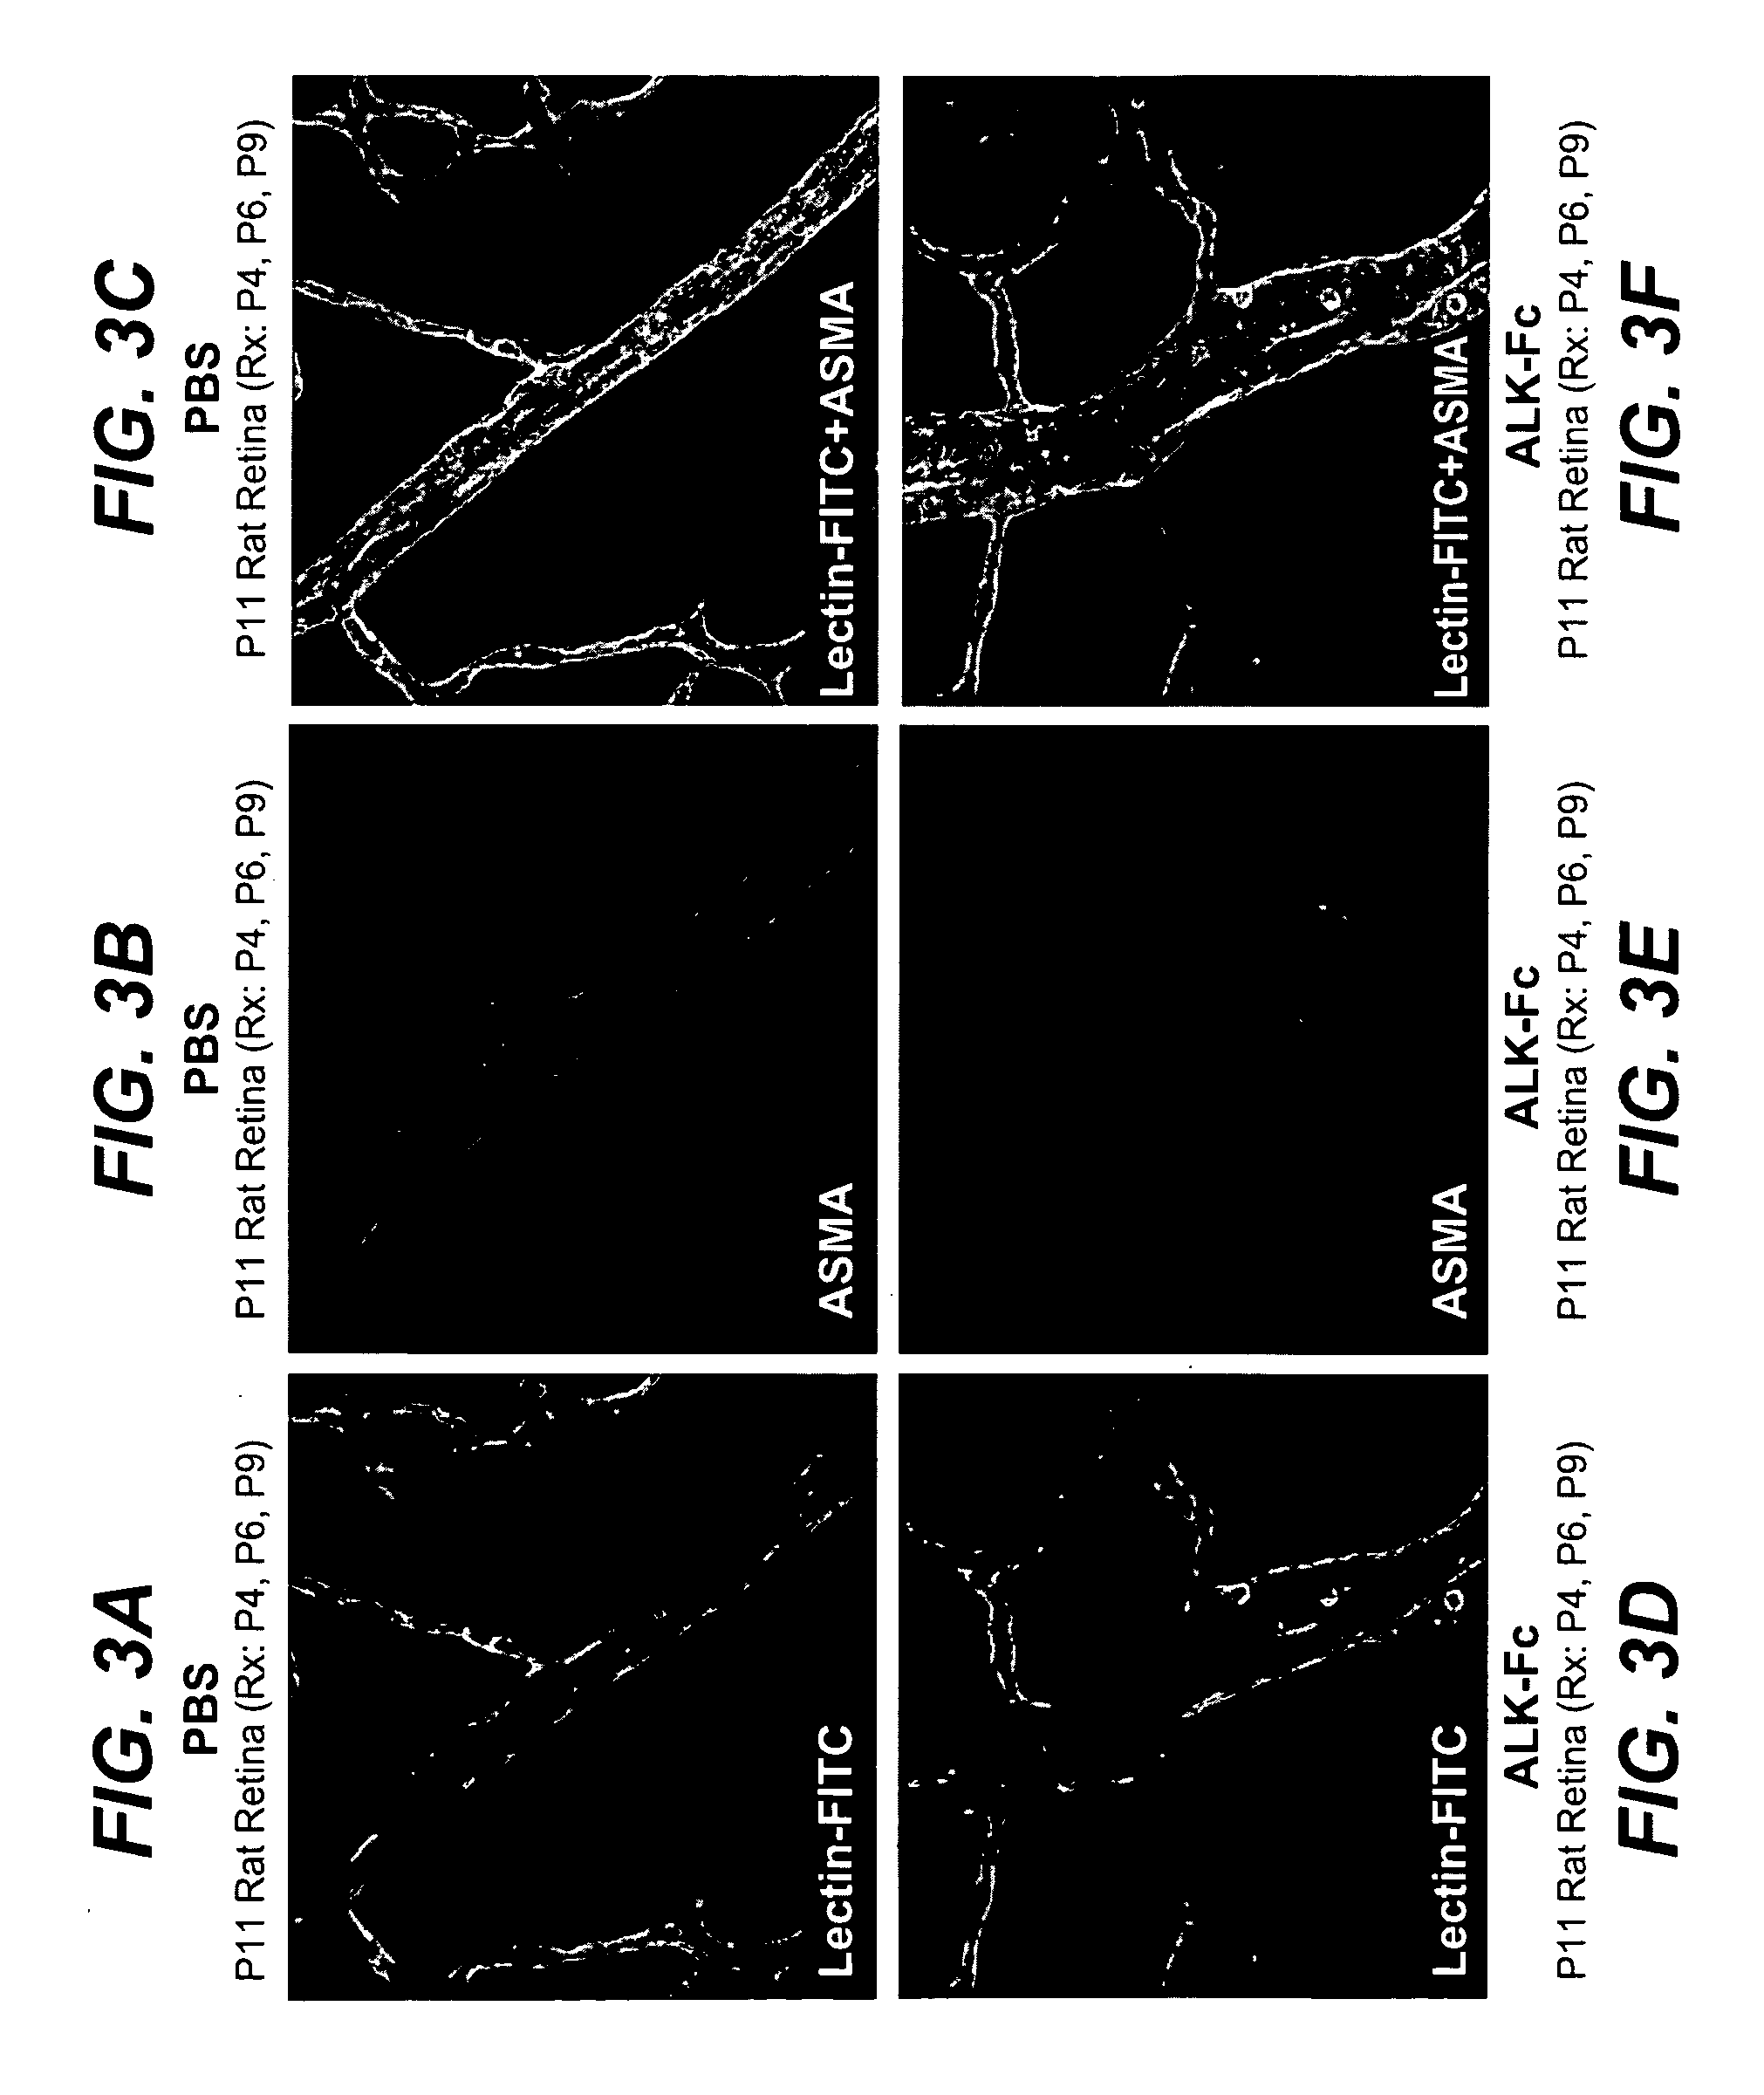 Activin receptor-like kinase-1 compositions and methods of use